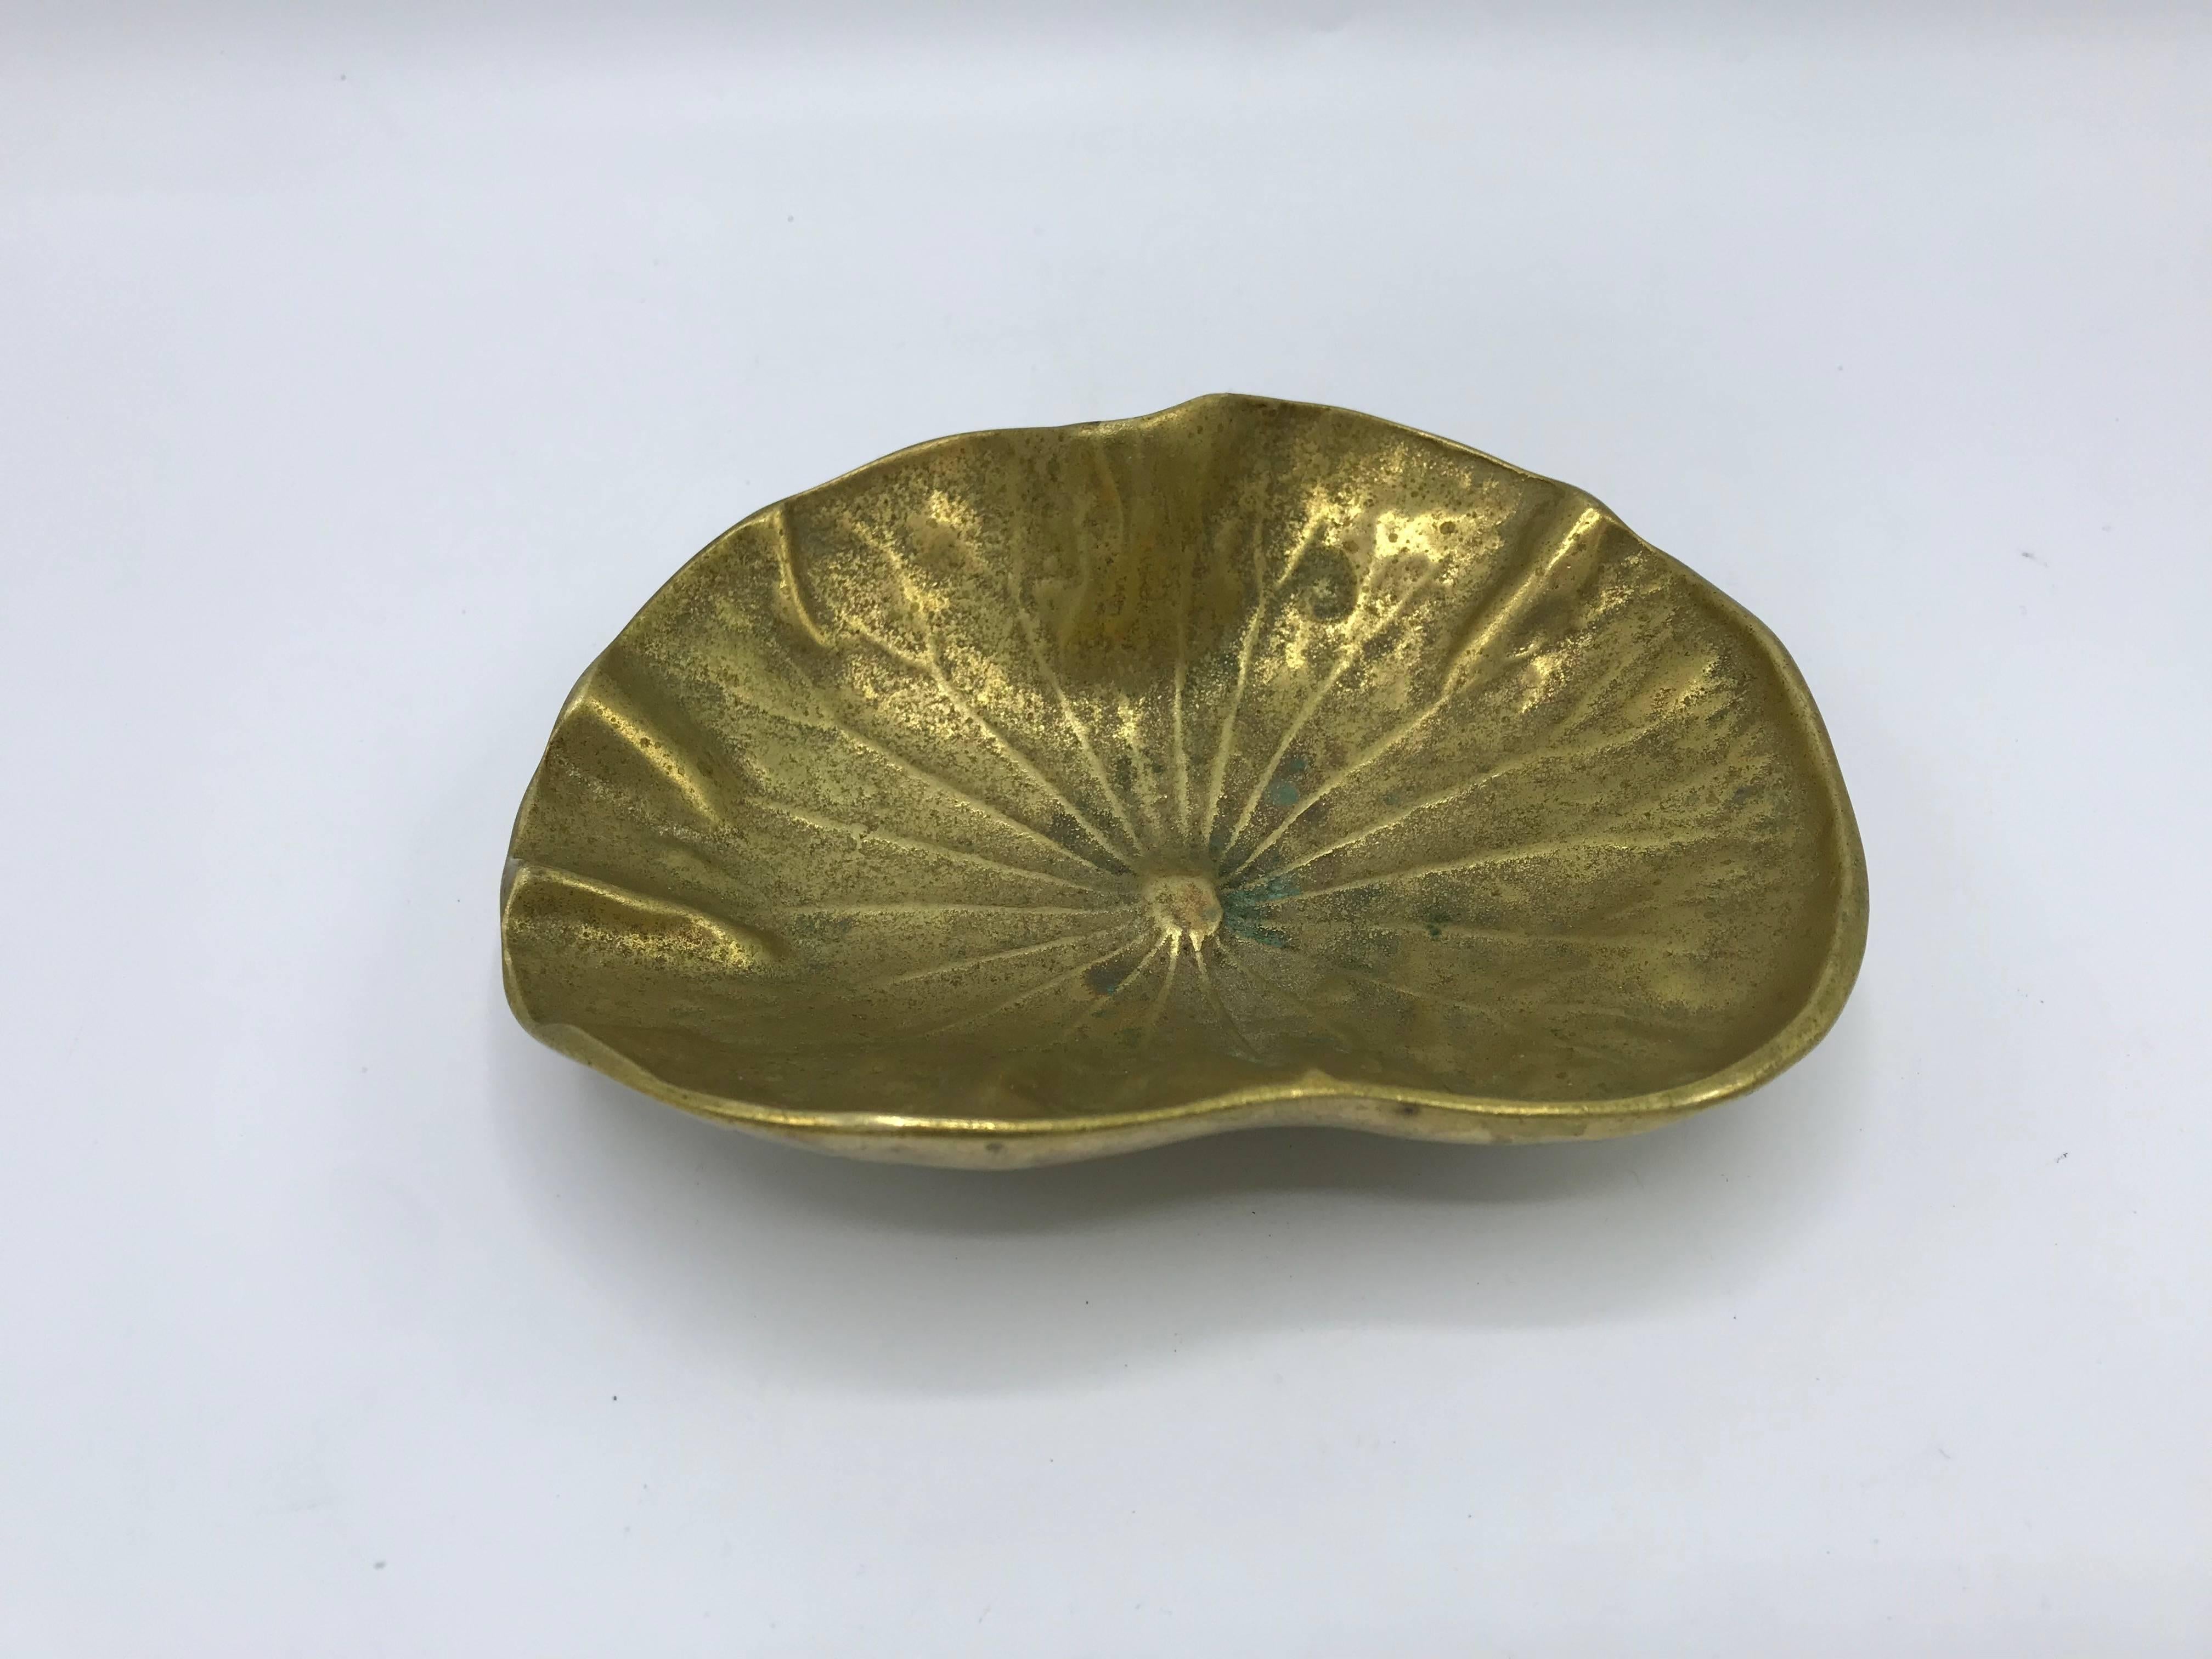 Offered is a stunning, 1940s Virginia Metalcrafters solid-brass lotus leaf dish. Marked on backside: '1948' with Virginia Metalcrafters signature 'VMC' stamp. Heavy.

“Since 1890, the Virginia Metalcrafters hallmark has become synonymous with fine